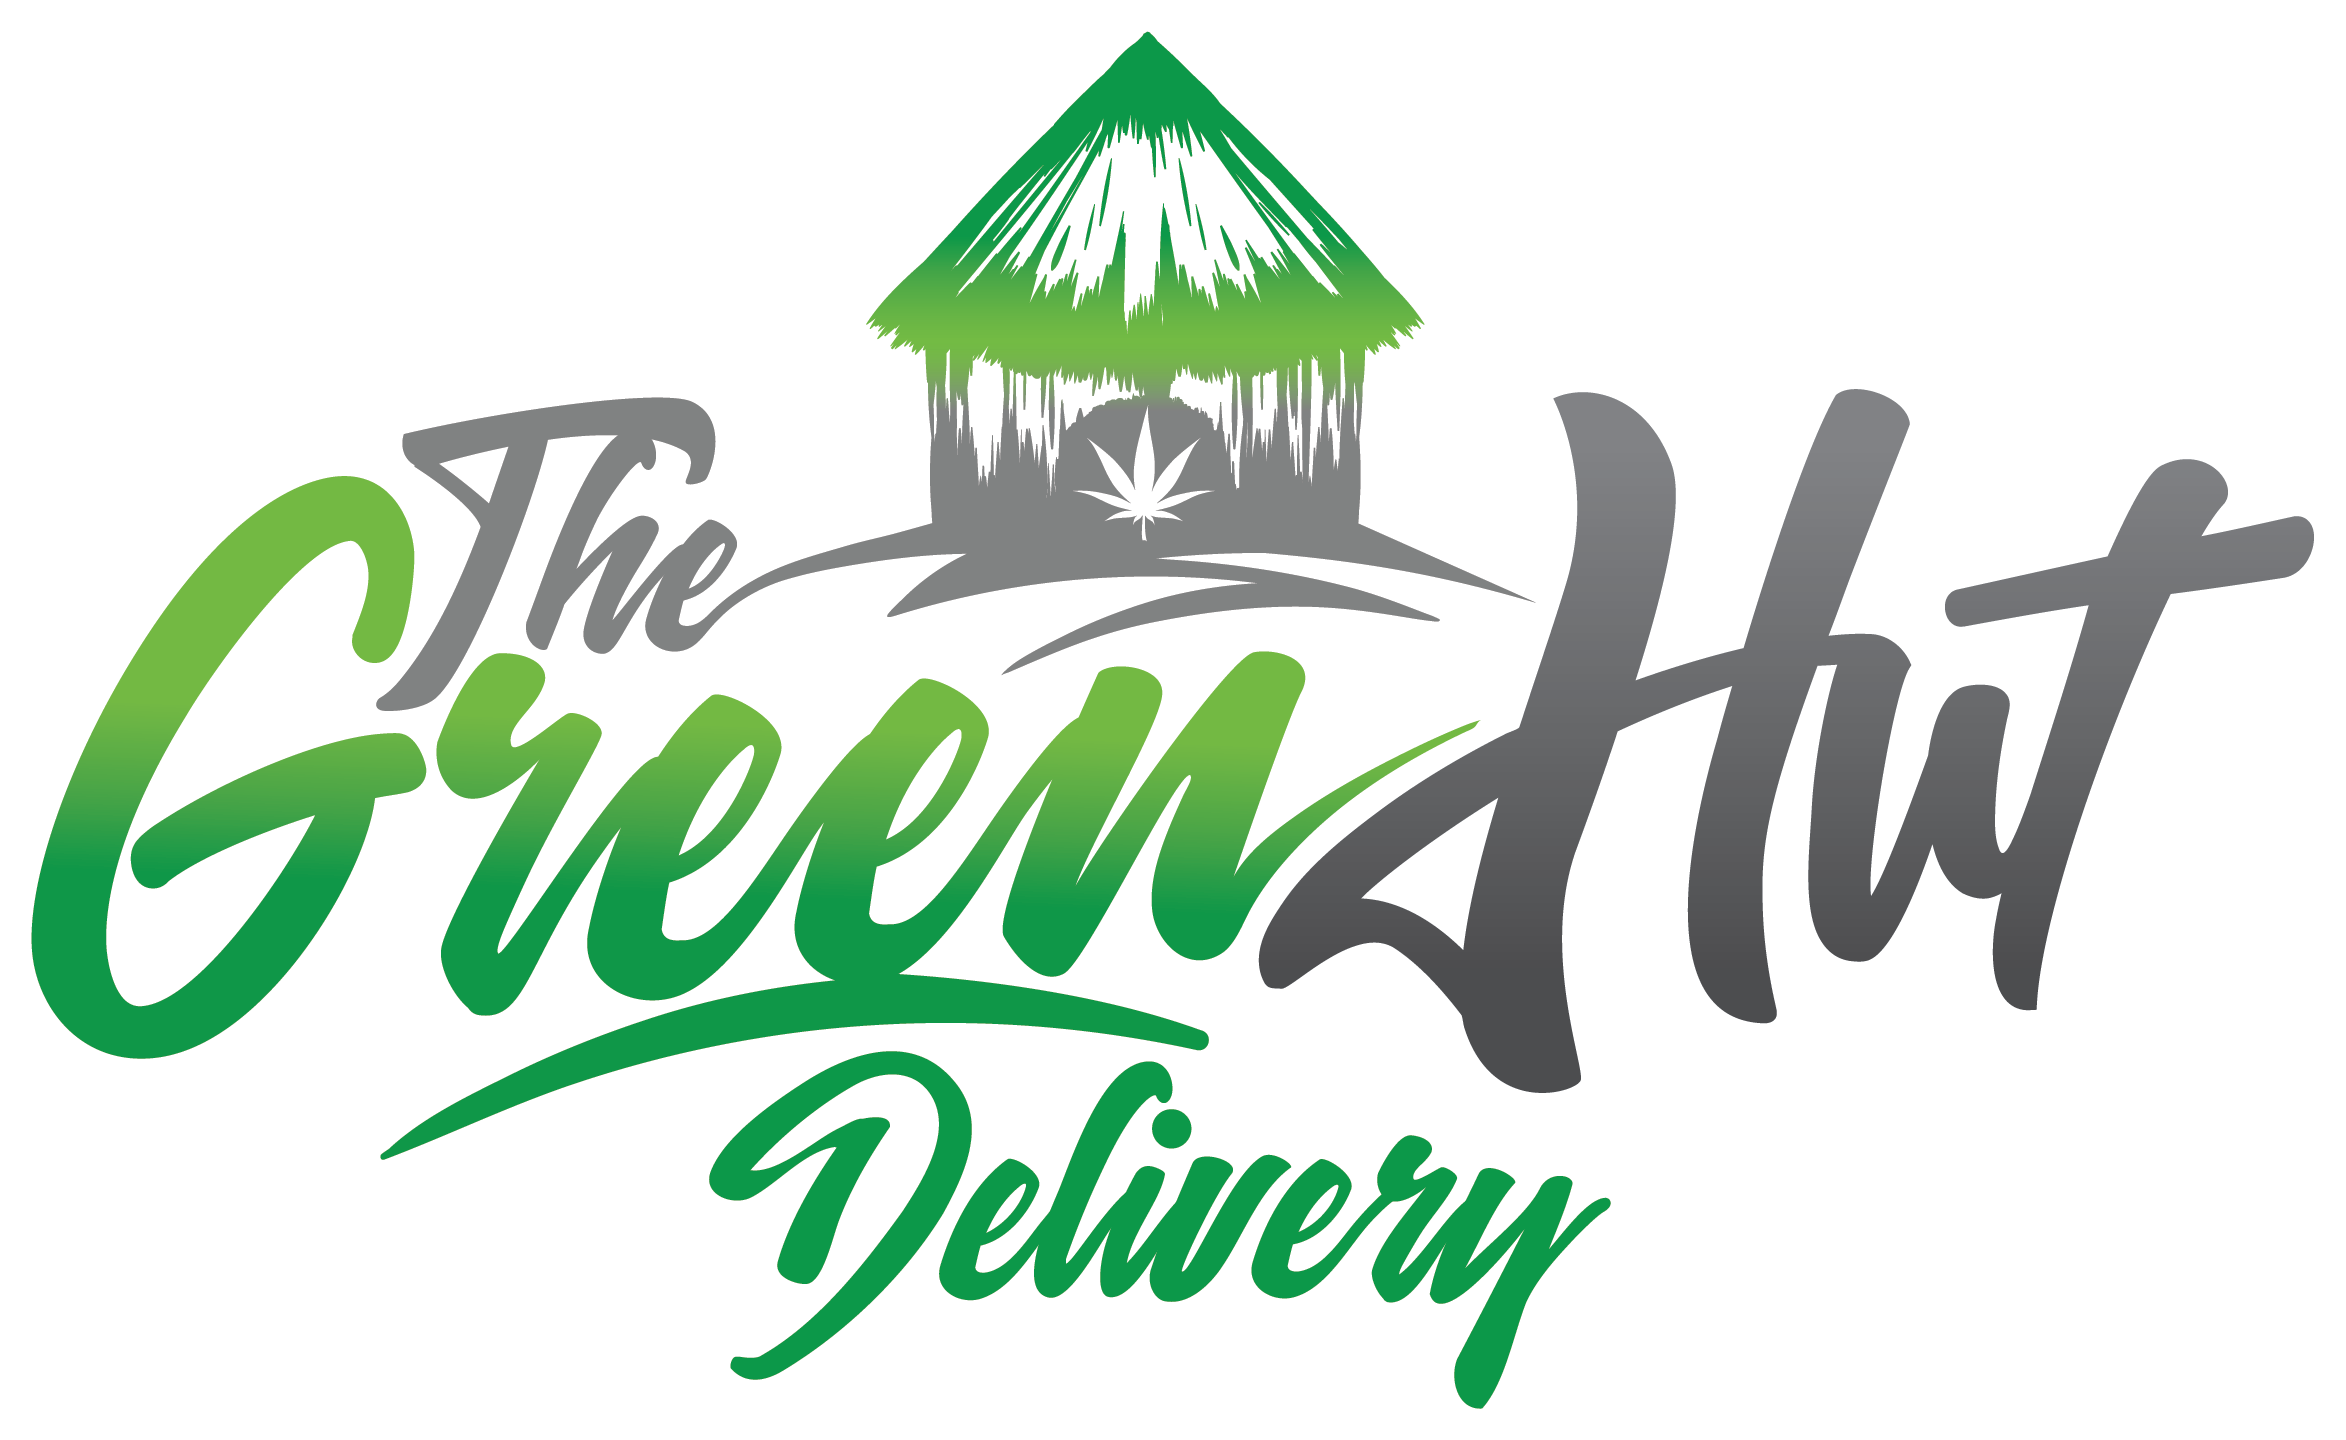 RECEIVE A FREE EIGHTH w/ FIRST ORDER!🔥